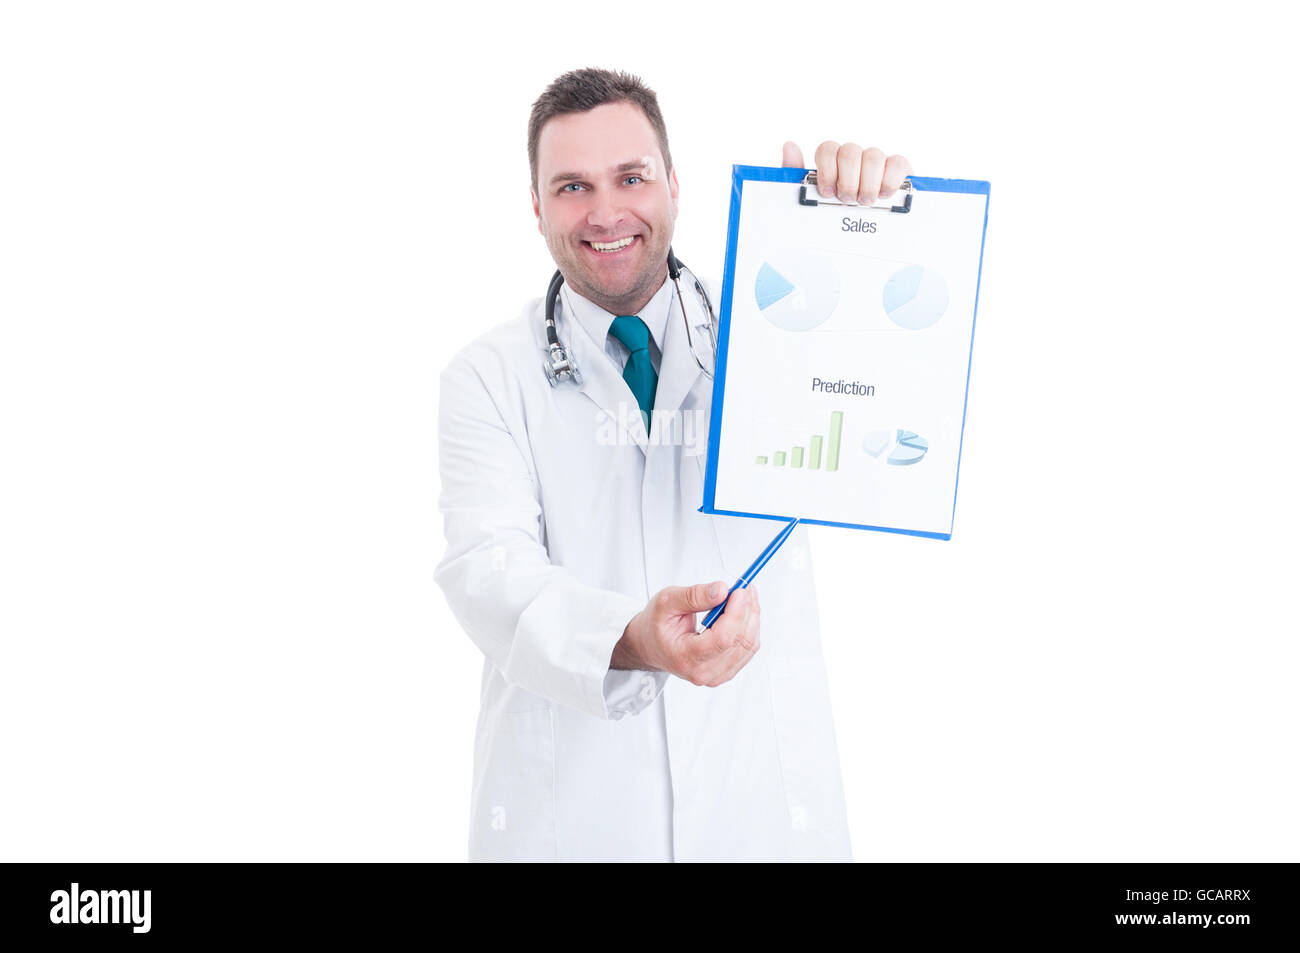 Male medic or doctor smiling and showing sale and predictions charts isolated on white background Stock Photo